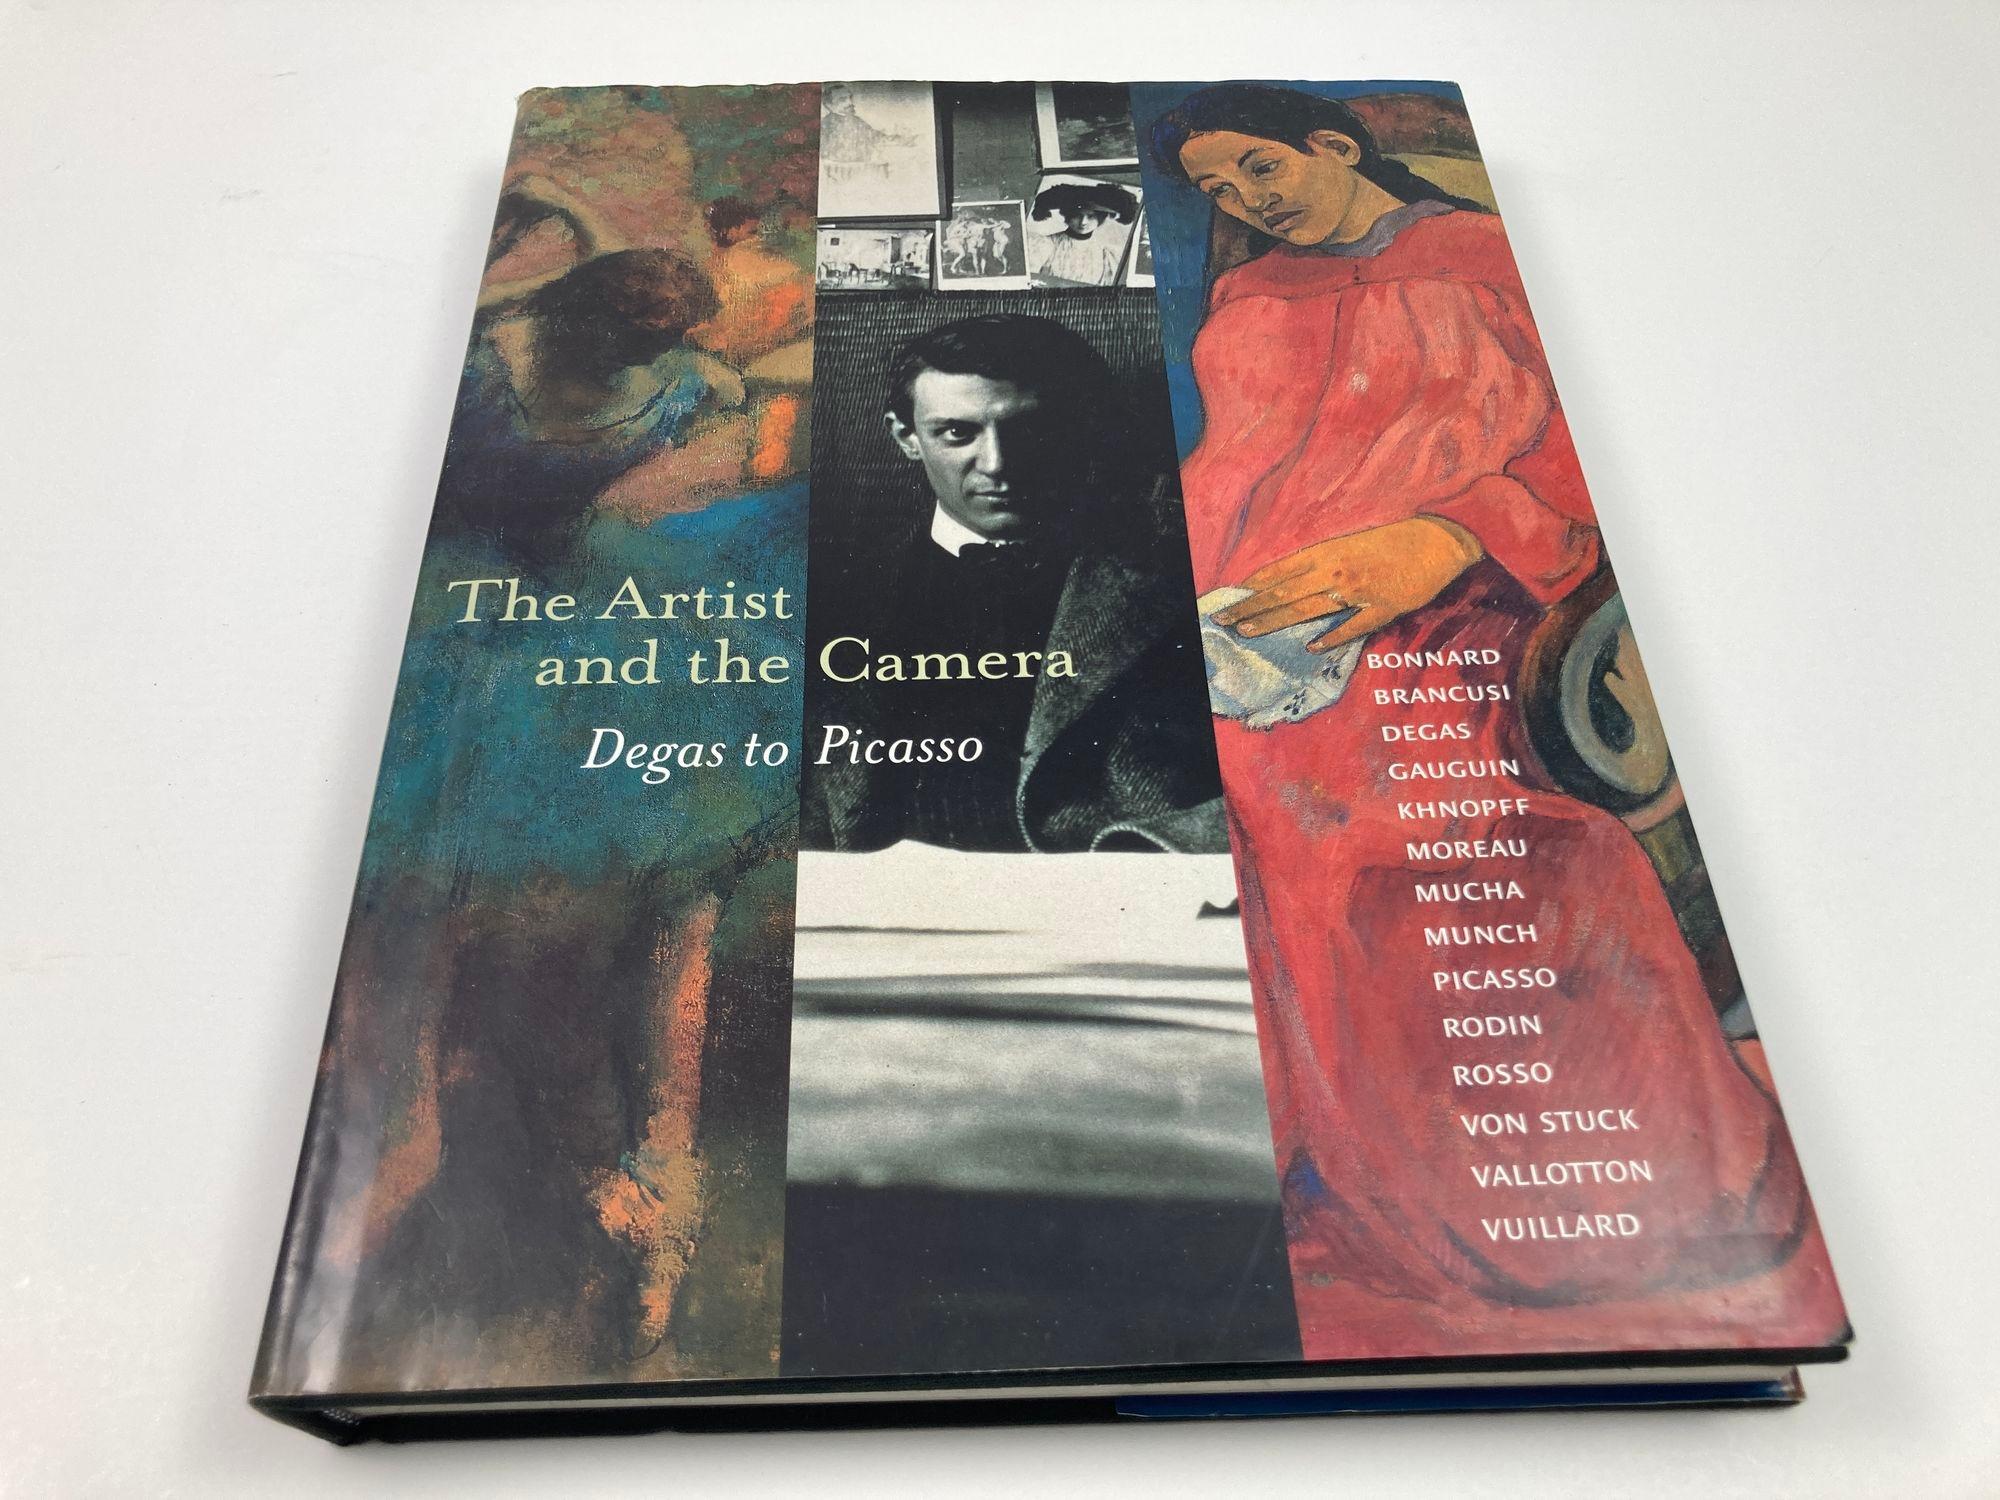 Over-sized hardback coffee table book with dust jacket titled THE ARTIST AND THE CAMERA: Degas to Picasso by Dorothy Kosinski.
Published in 1999 by Dallas Museum of Art.
Beautifully illustrated with vintage black and white photographs and color